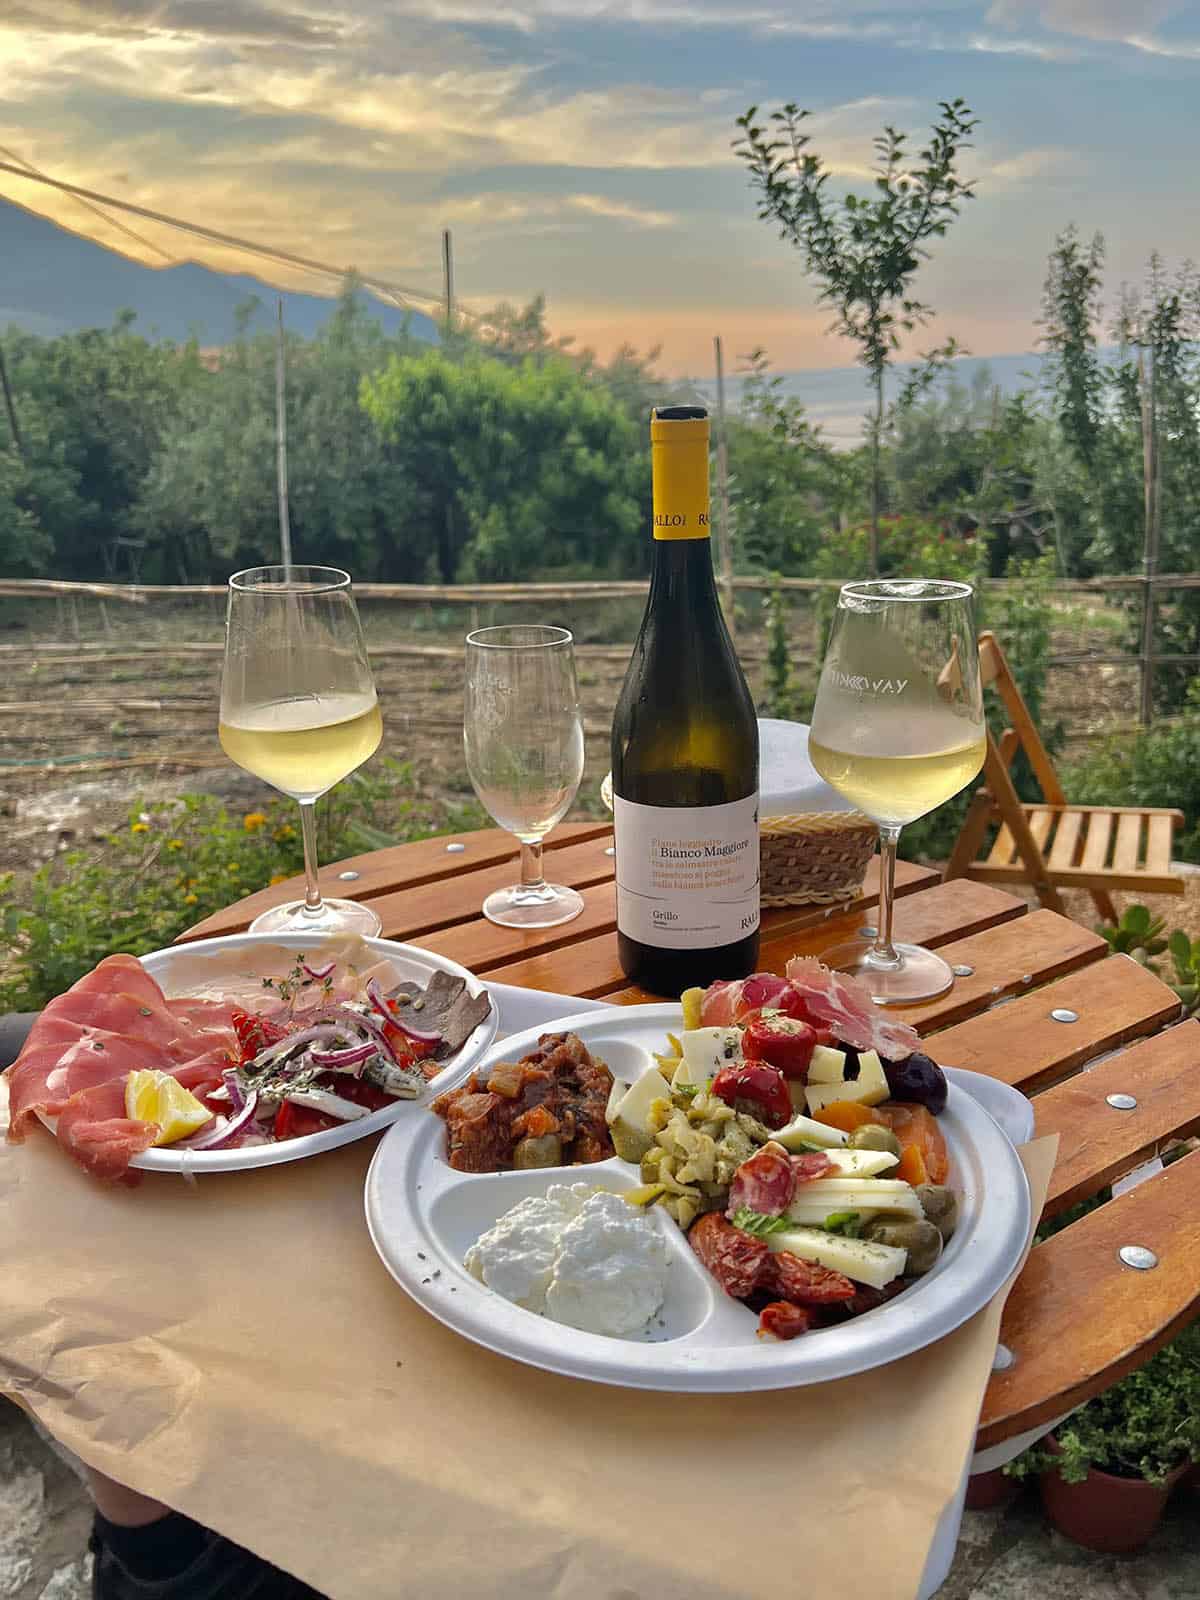 An image of wine and antipasto on a table in a garden at sunset